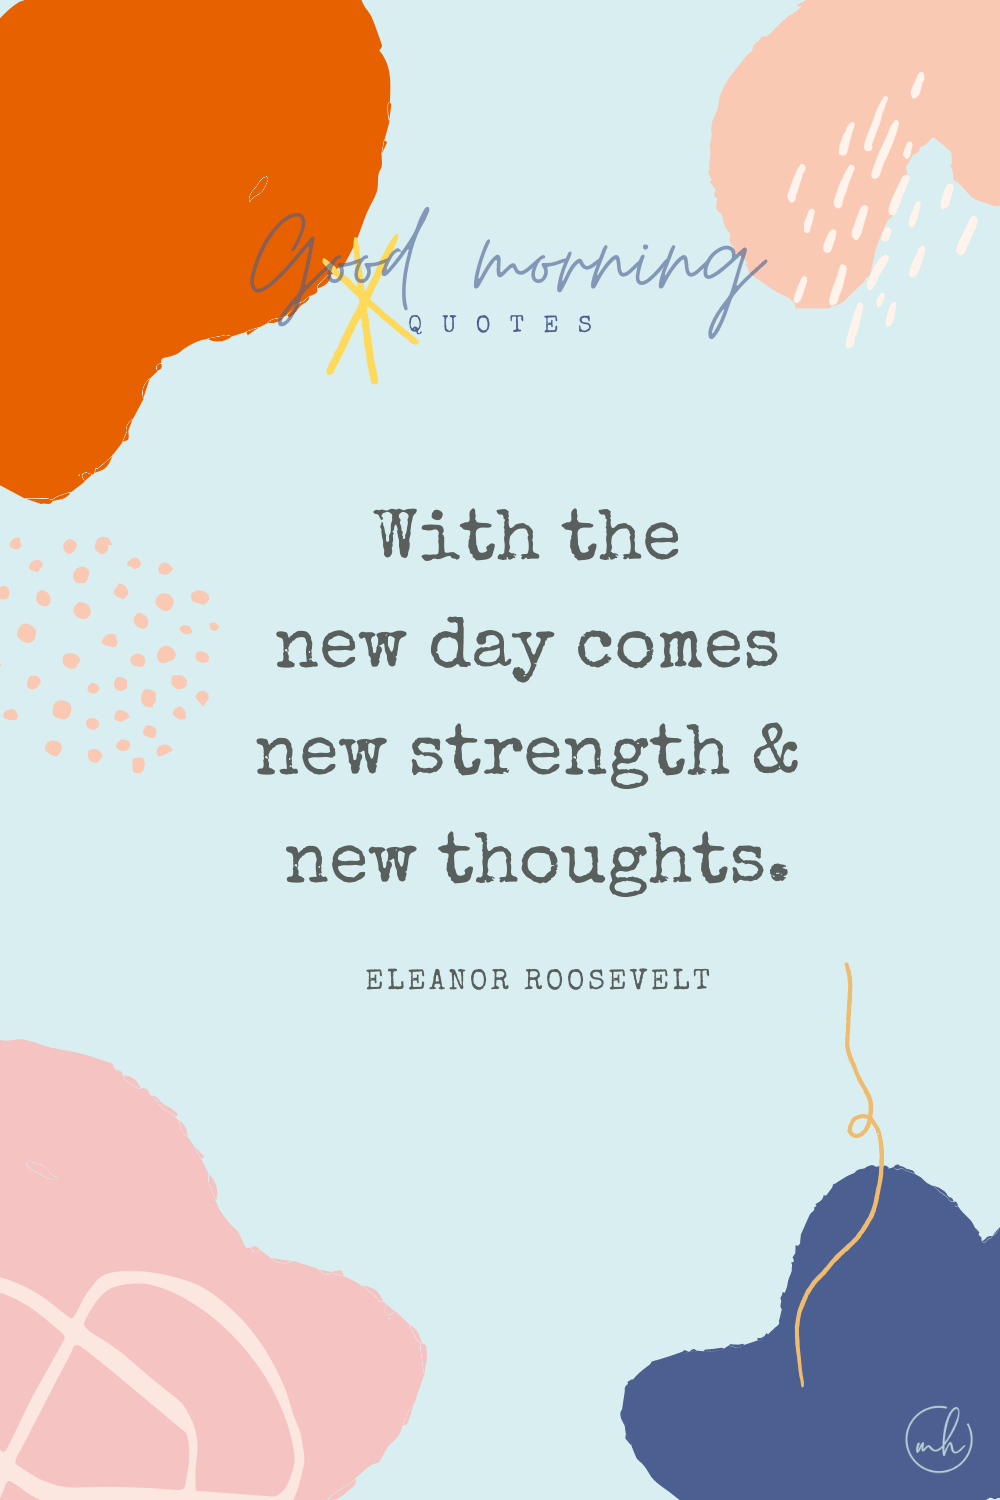 "With the new day comes new strength and new thoughts." – Eleanor Roosevelt